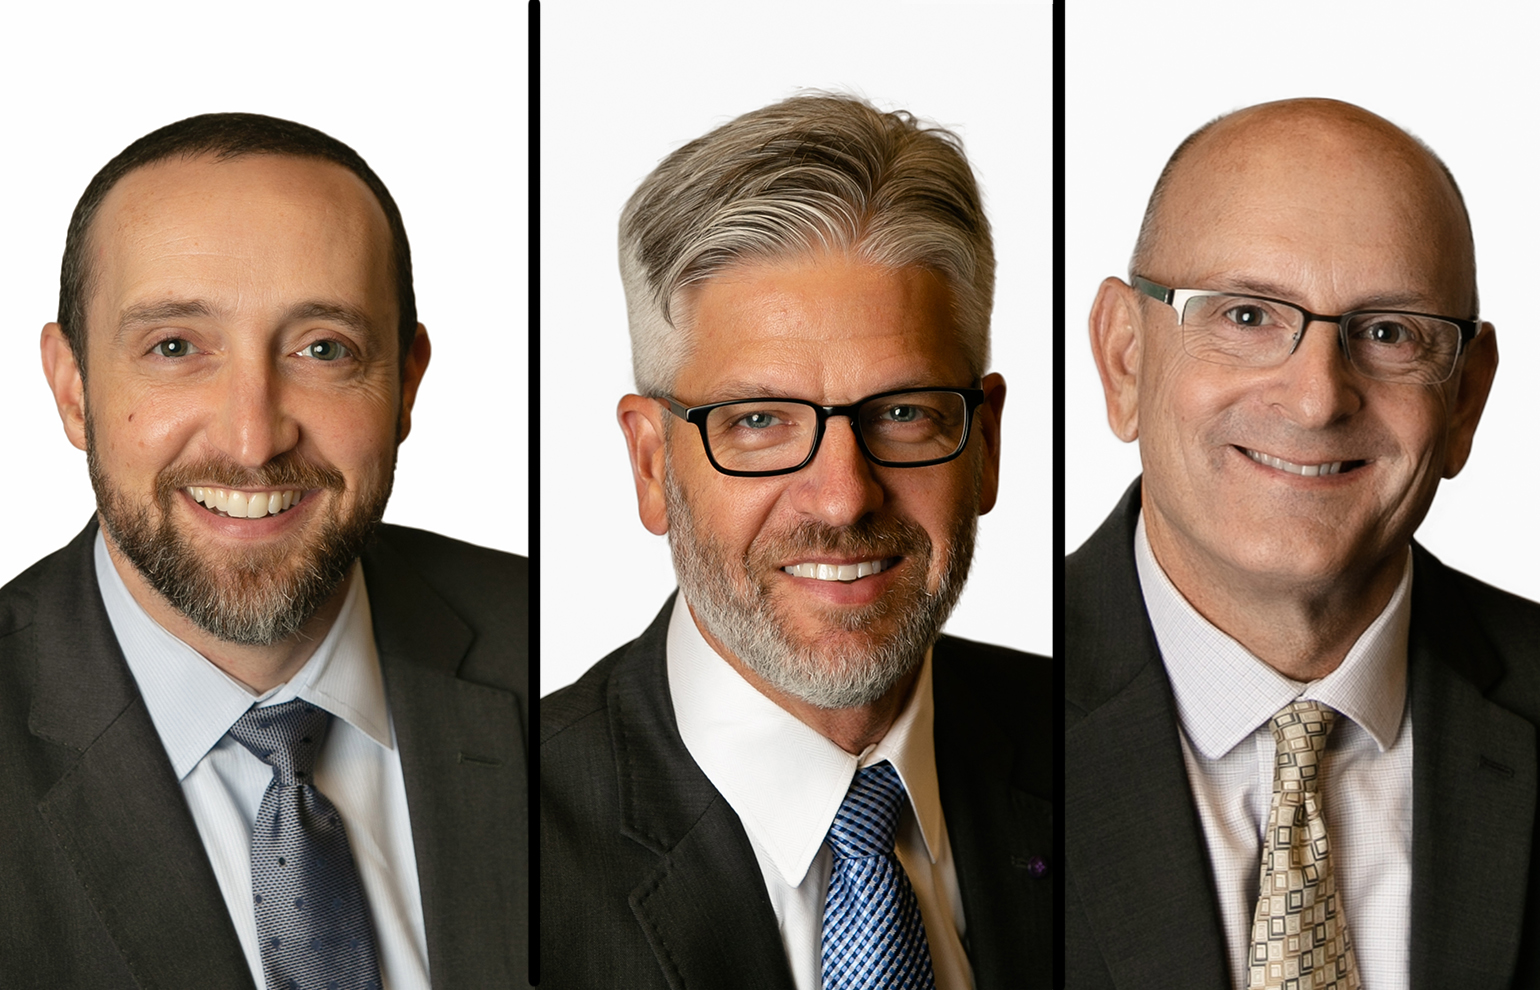 Daniel Cox, from left, was named acting president and CEO of Riverview Bank, Robert Benke was promoted to executive vice president and chief credit officer, and Michael Sventek has been hired to serve as Riverview’s executive vice president and chief lending officer.